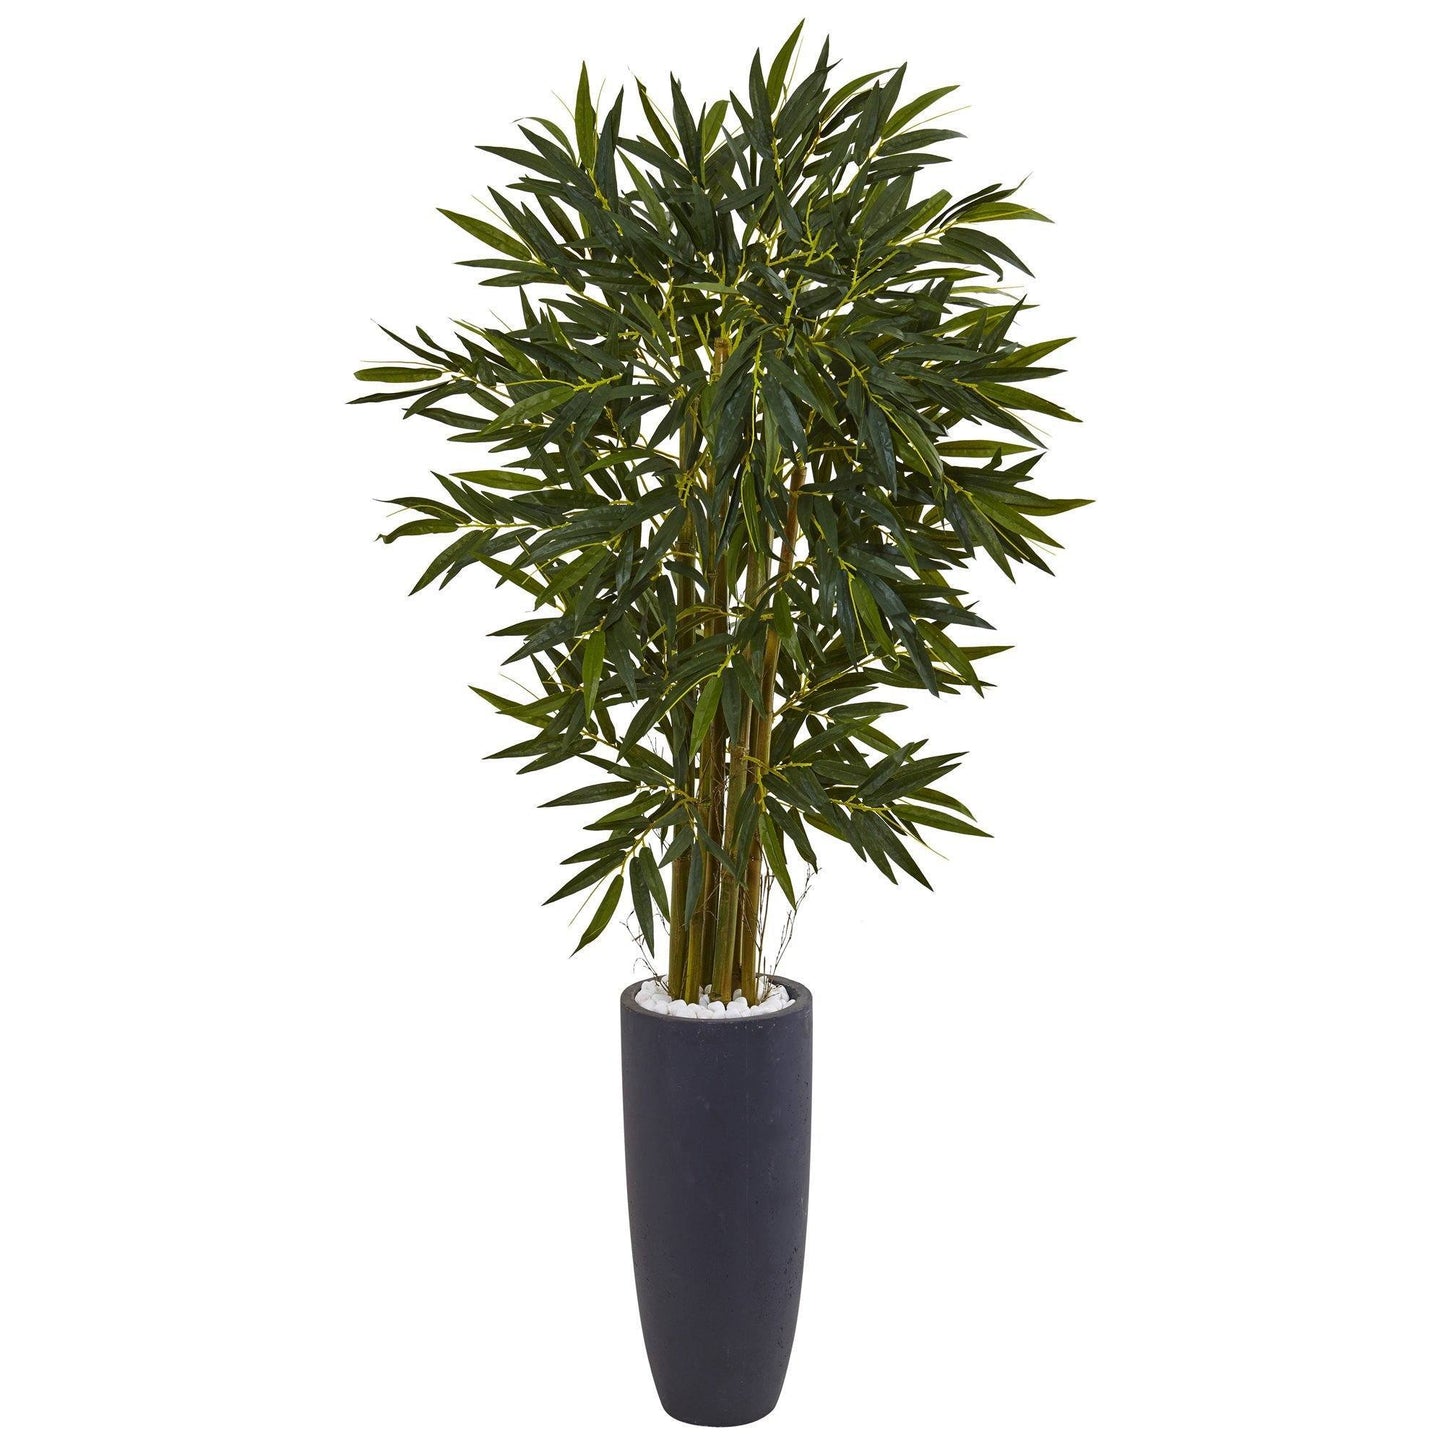 6.5’ Bamboo Tree in Gray Cylinder Planter by Nearly Natural